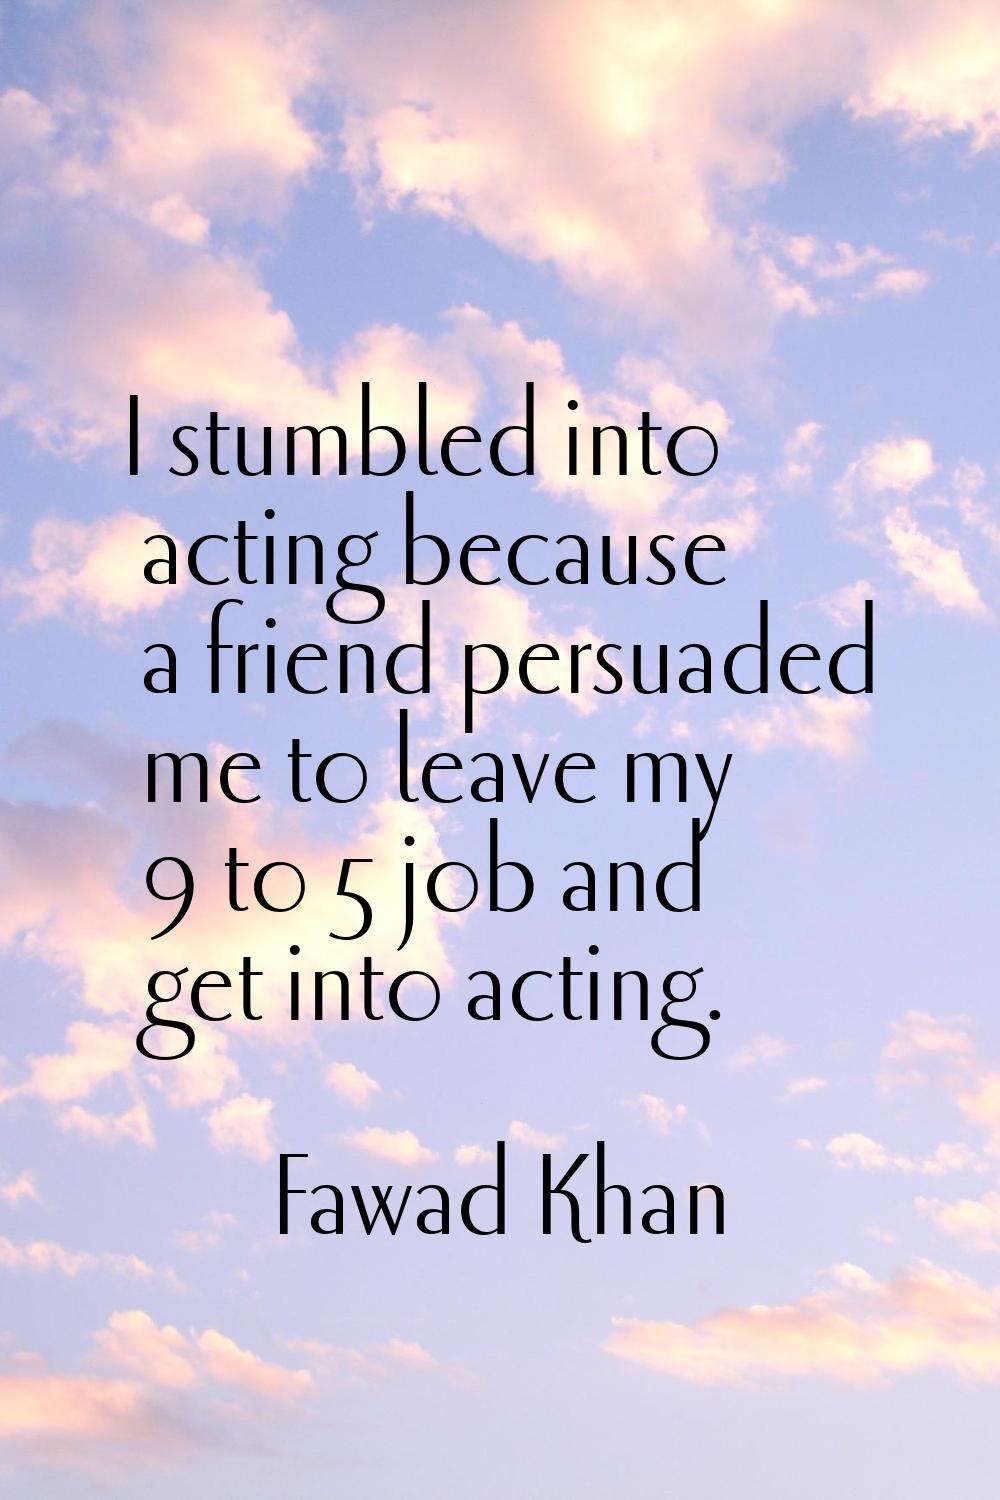 I stumbled into acting because a friend persuaded me to leave my 9 to 5 job and get into acting.